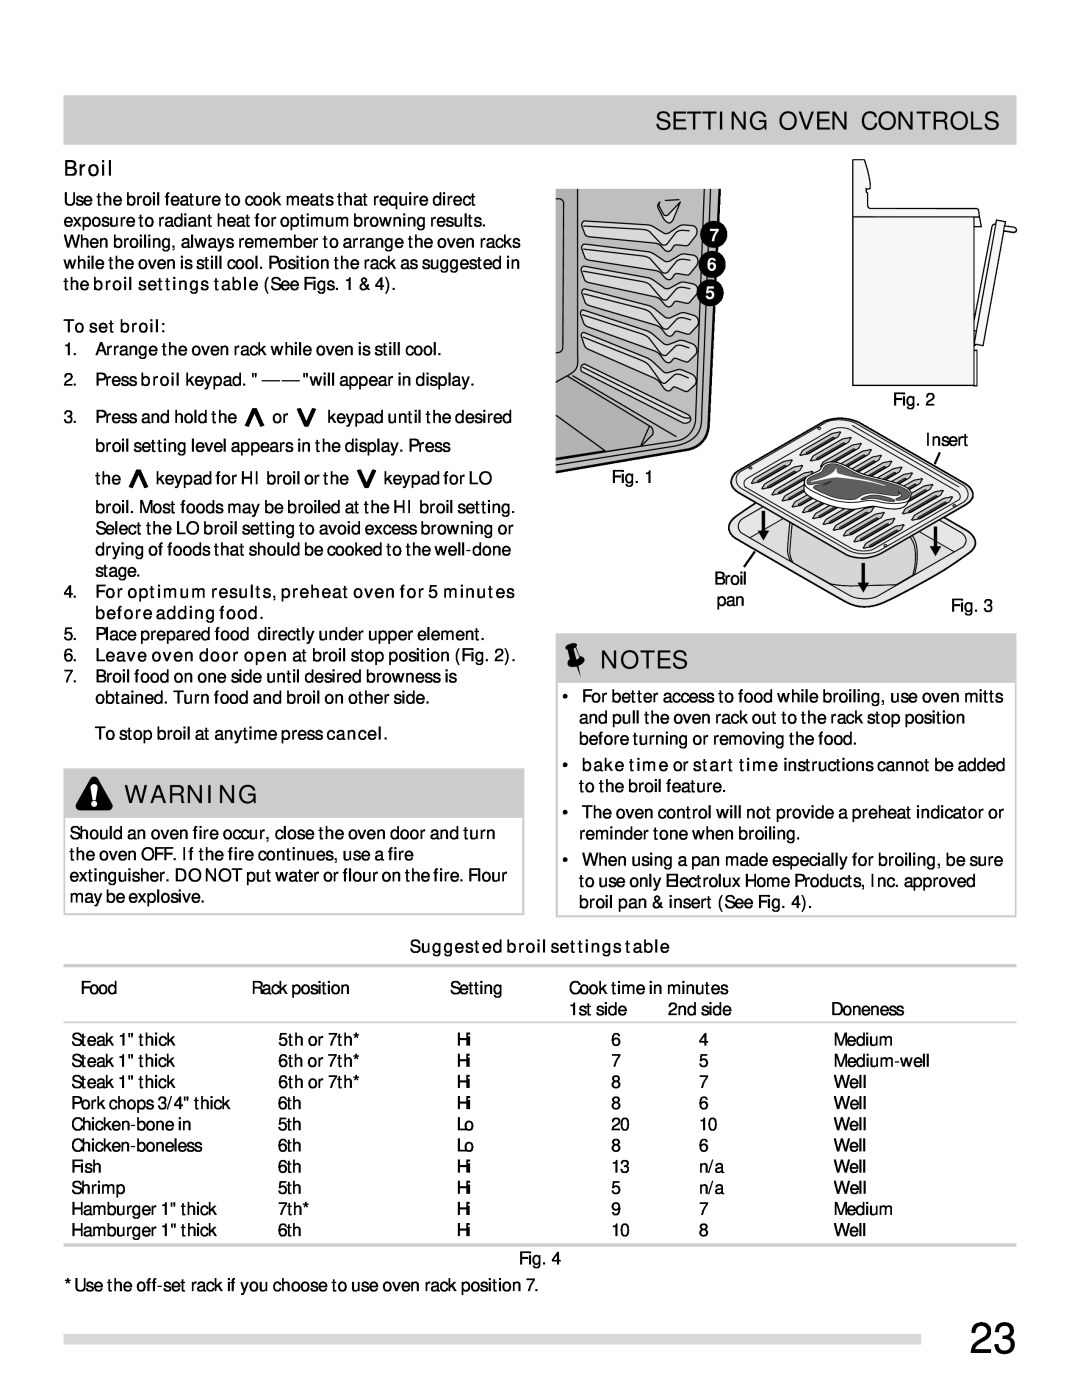 Frigidaire 316902315 Broil, Setting Oven Controls, To set broil, Suggested broil settings table 